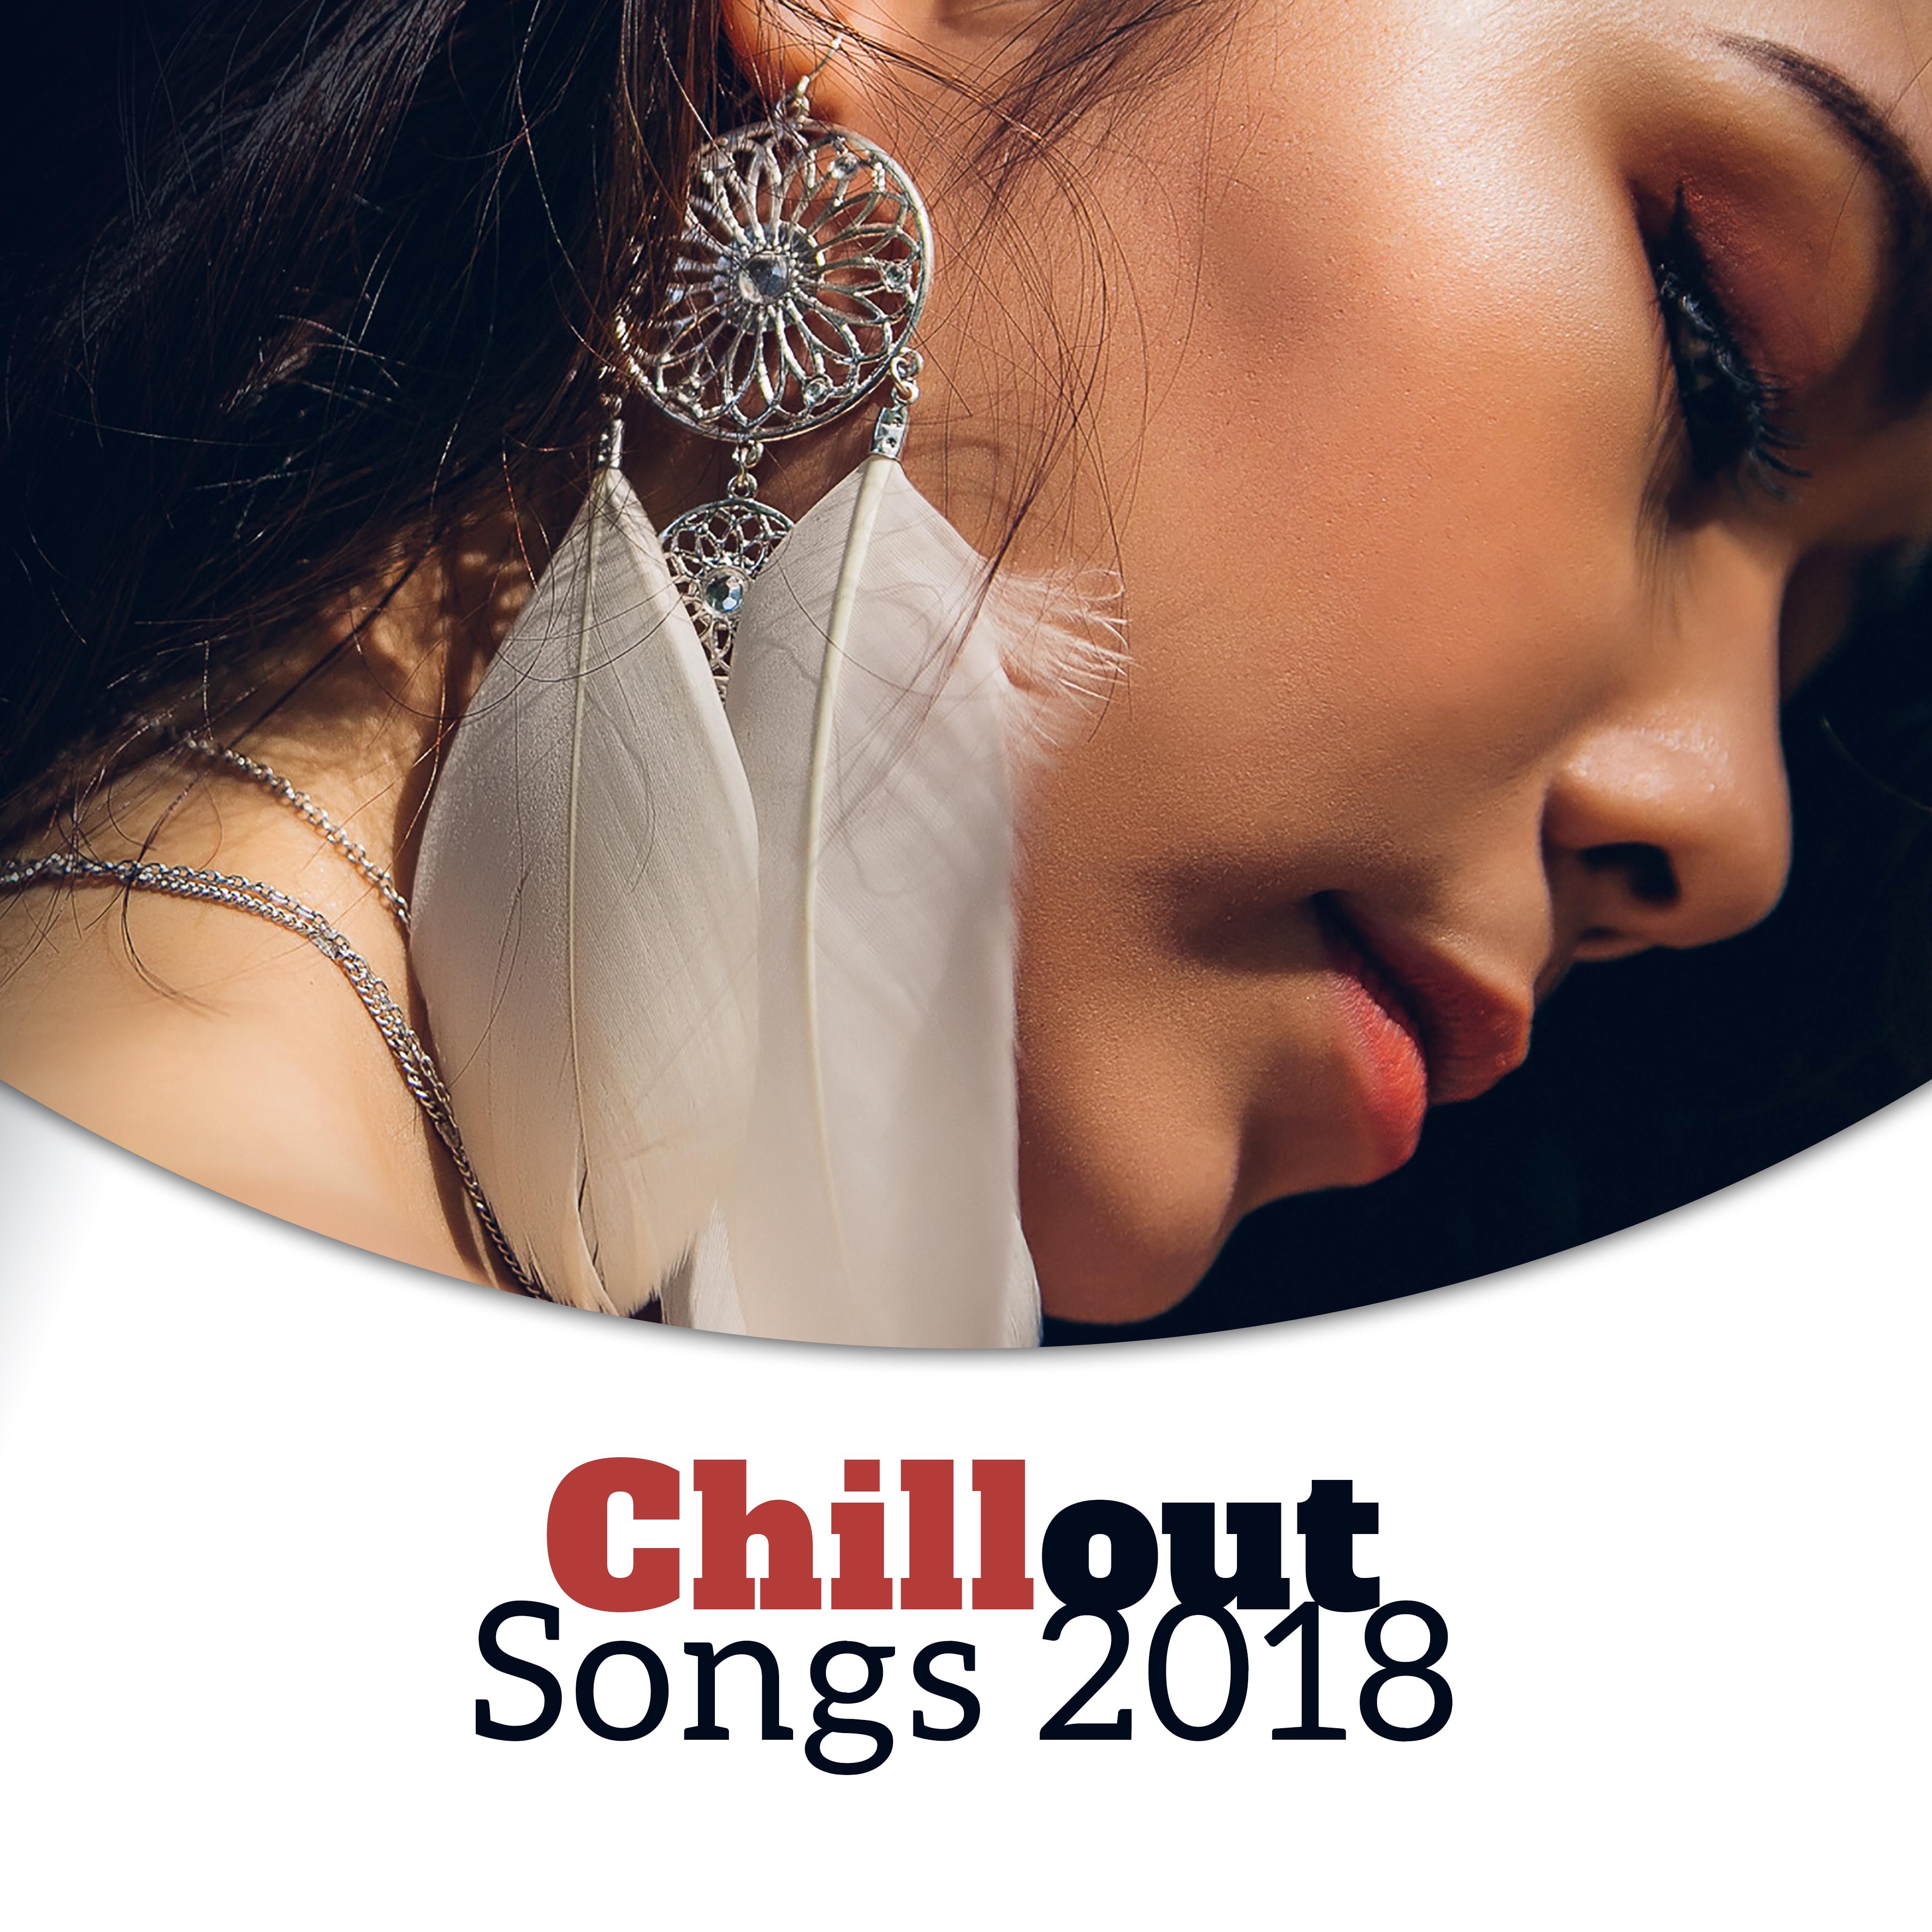 Chillout Songs 2018